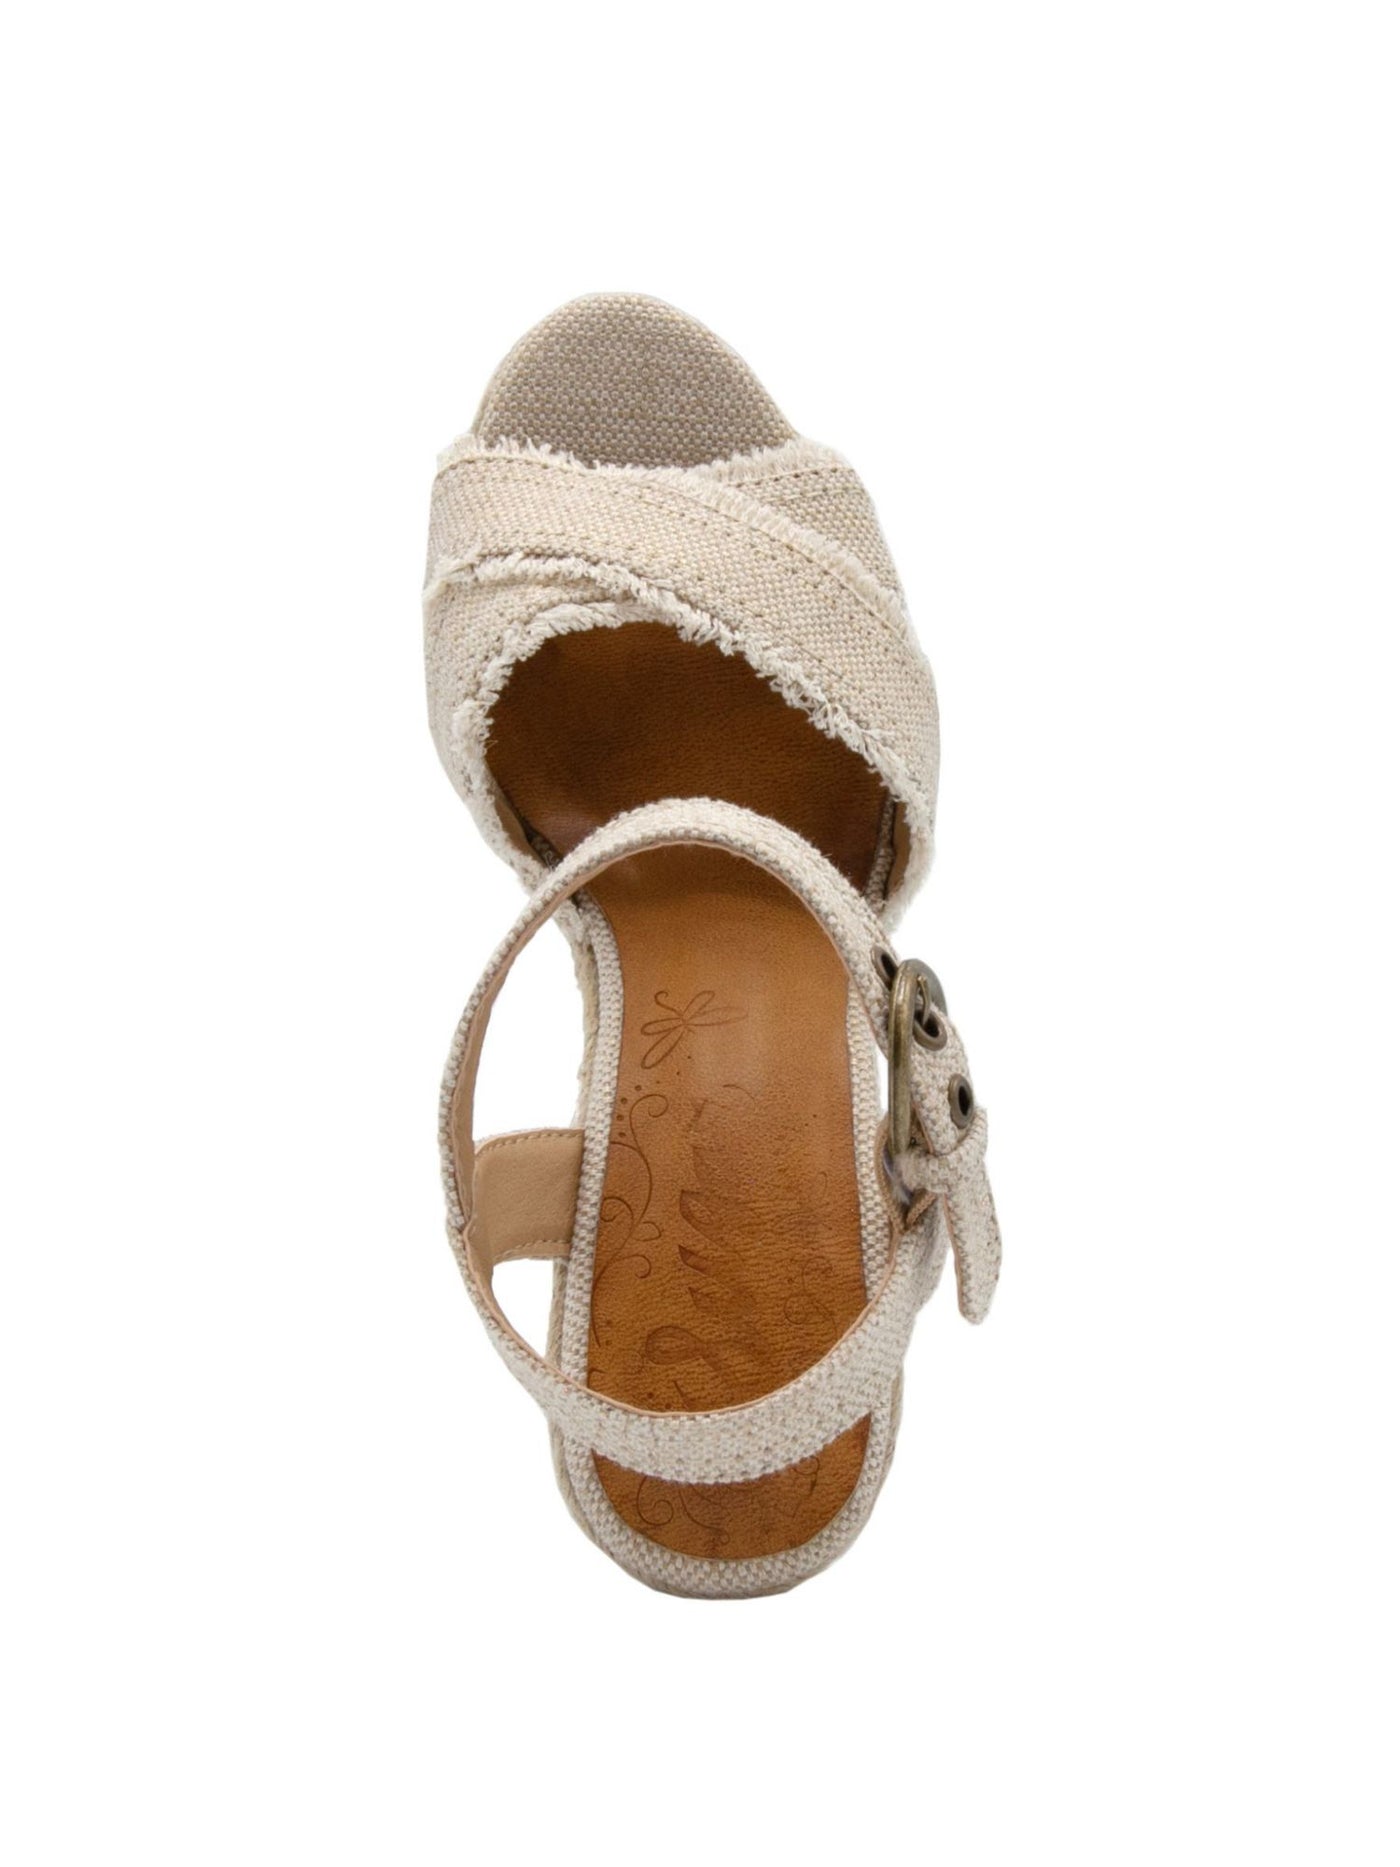 SUGAR Womens Beige Frayed Padded Jute Adjustable Strap Woven Fave Round Toe Wedge Buckle Espadrille Shoes 8 M